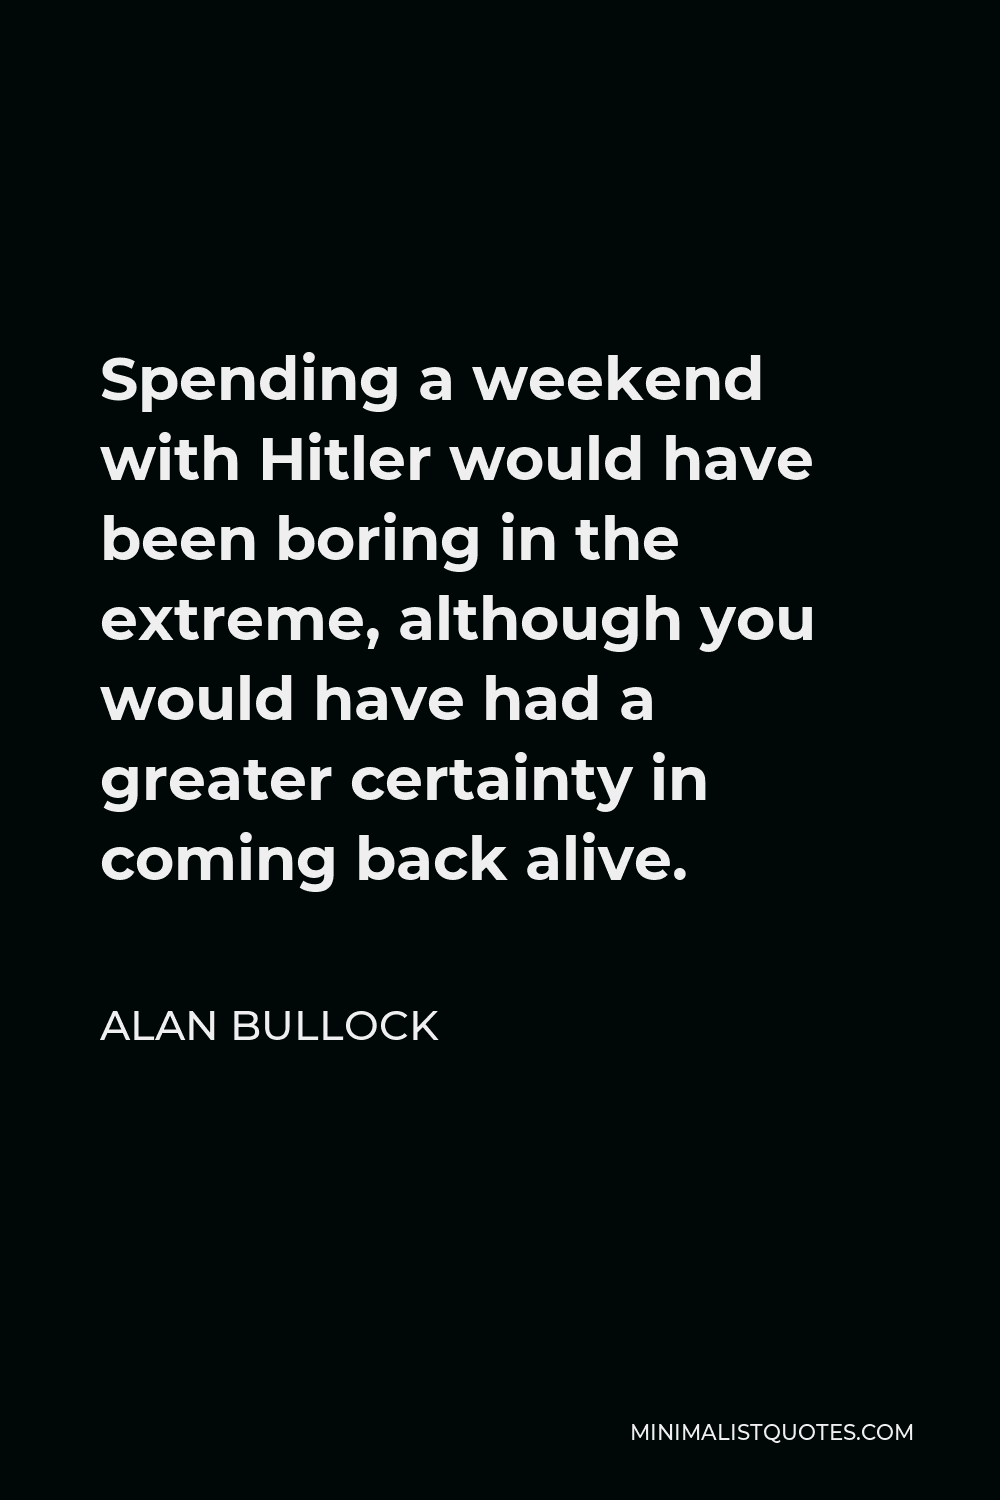 Alan Bullock Quote - Spending a weekend with Hitler would have been boring in the extreme, although you would have had a greater certainty in coming back alive.